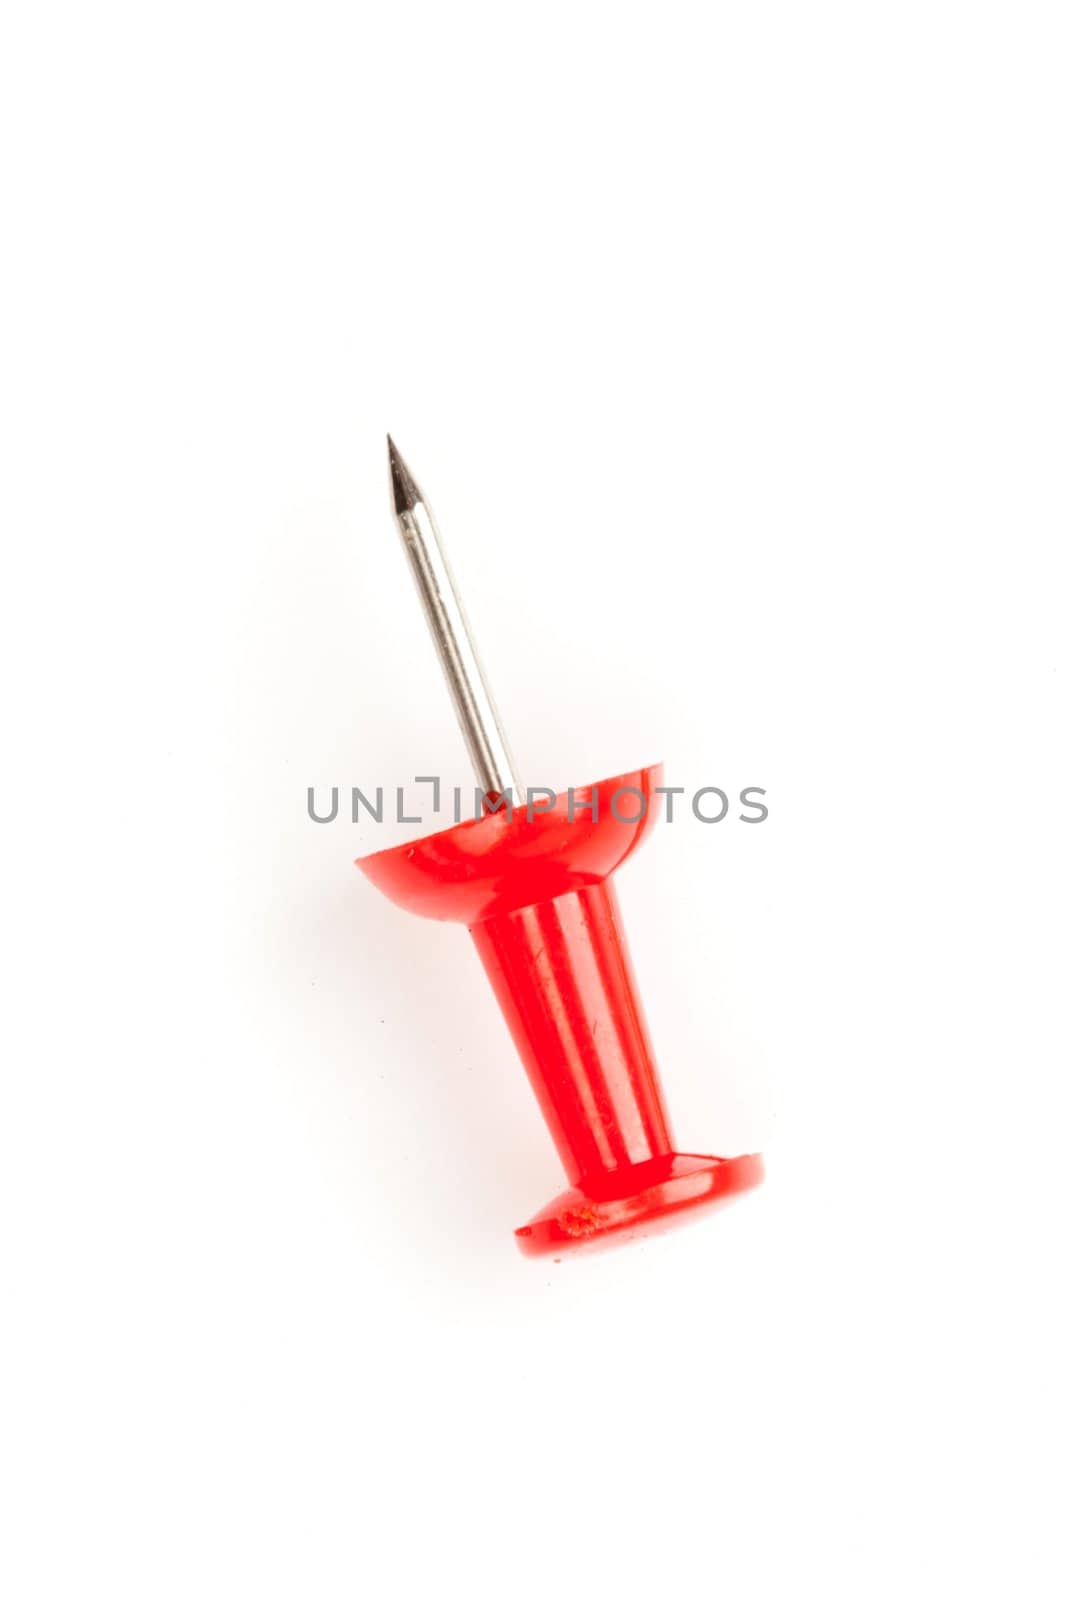 Close up of a red pushpin on the floor against a white background